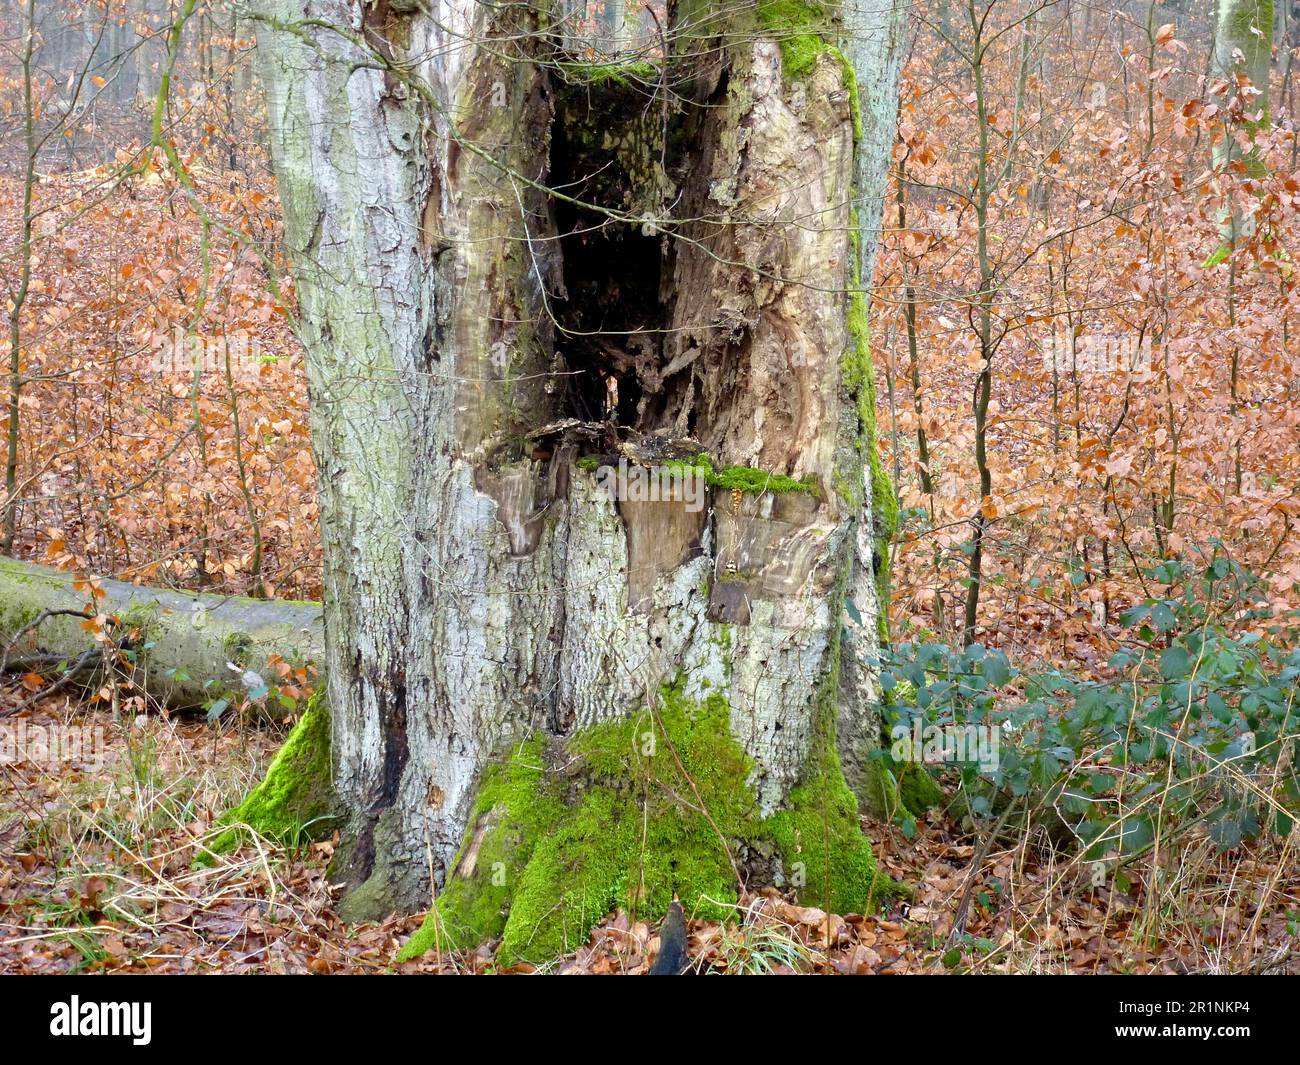 Near Maulbronn, hollowed out beech tree trunk in deciduous forest Stock Photo